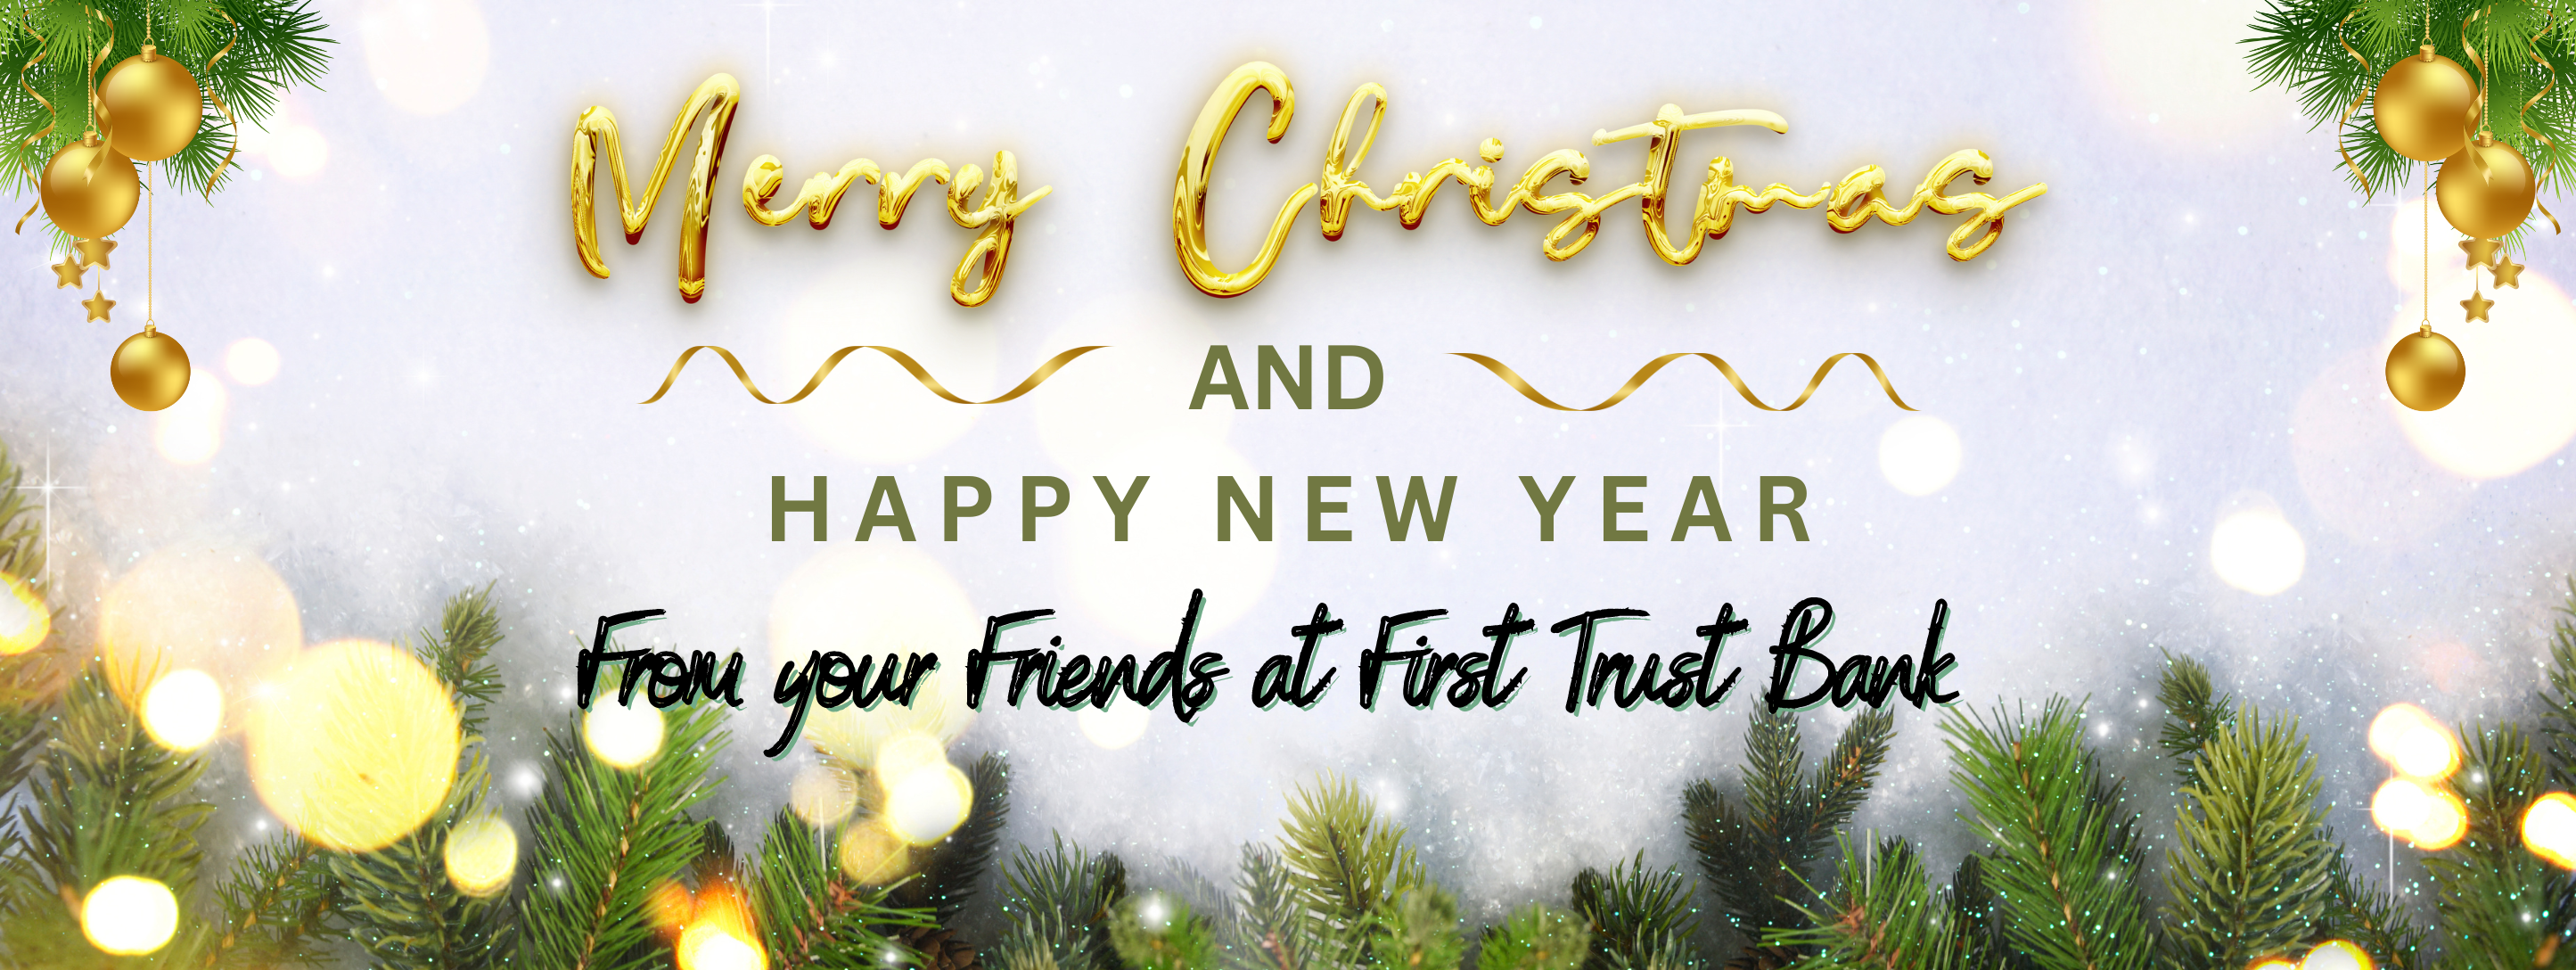 Merry Christmas and Happy New Year from your friends at First Trust Bank!